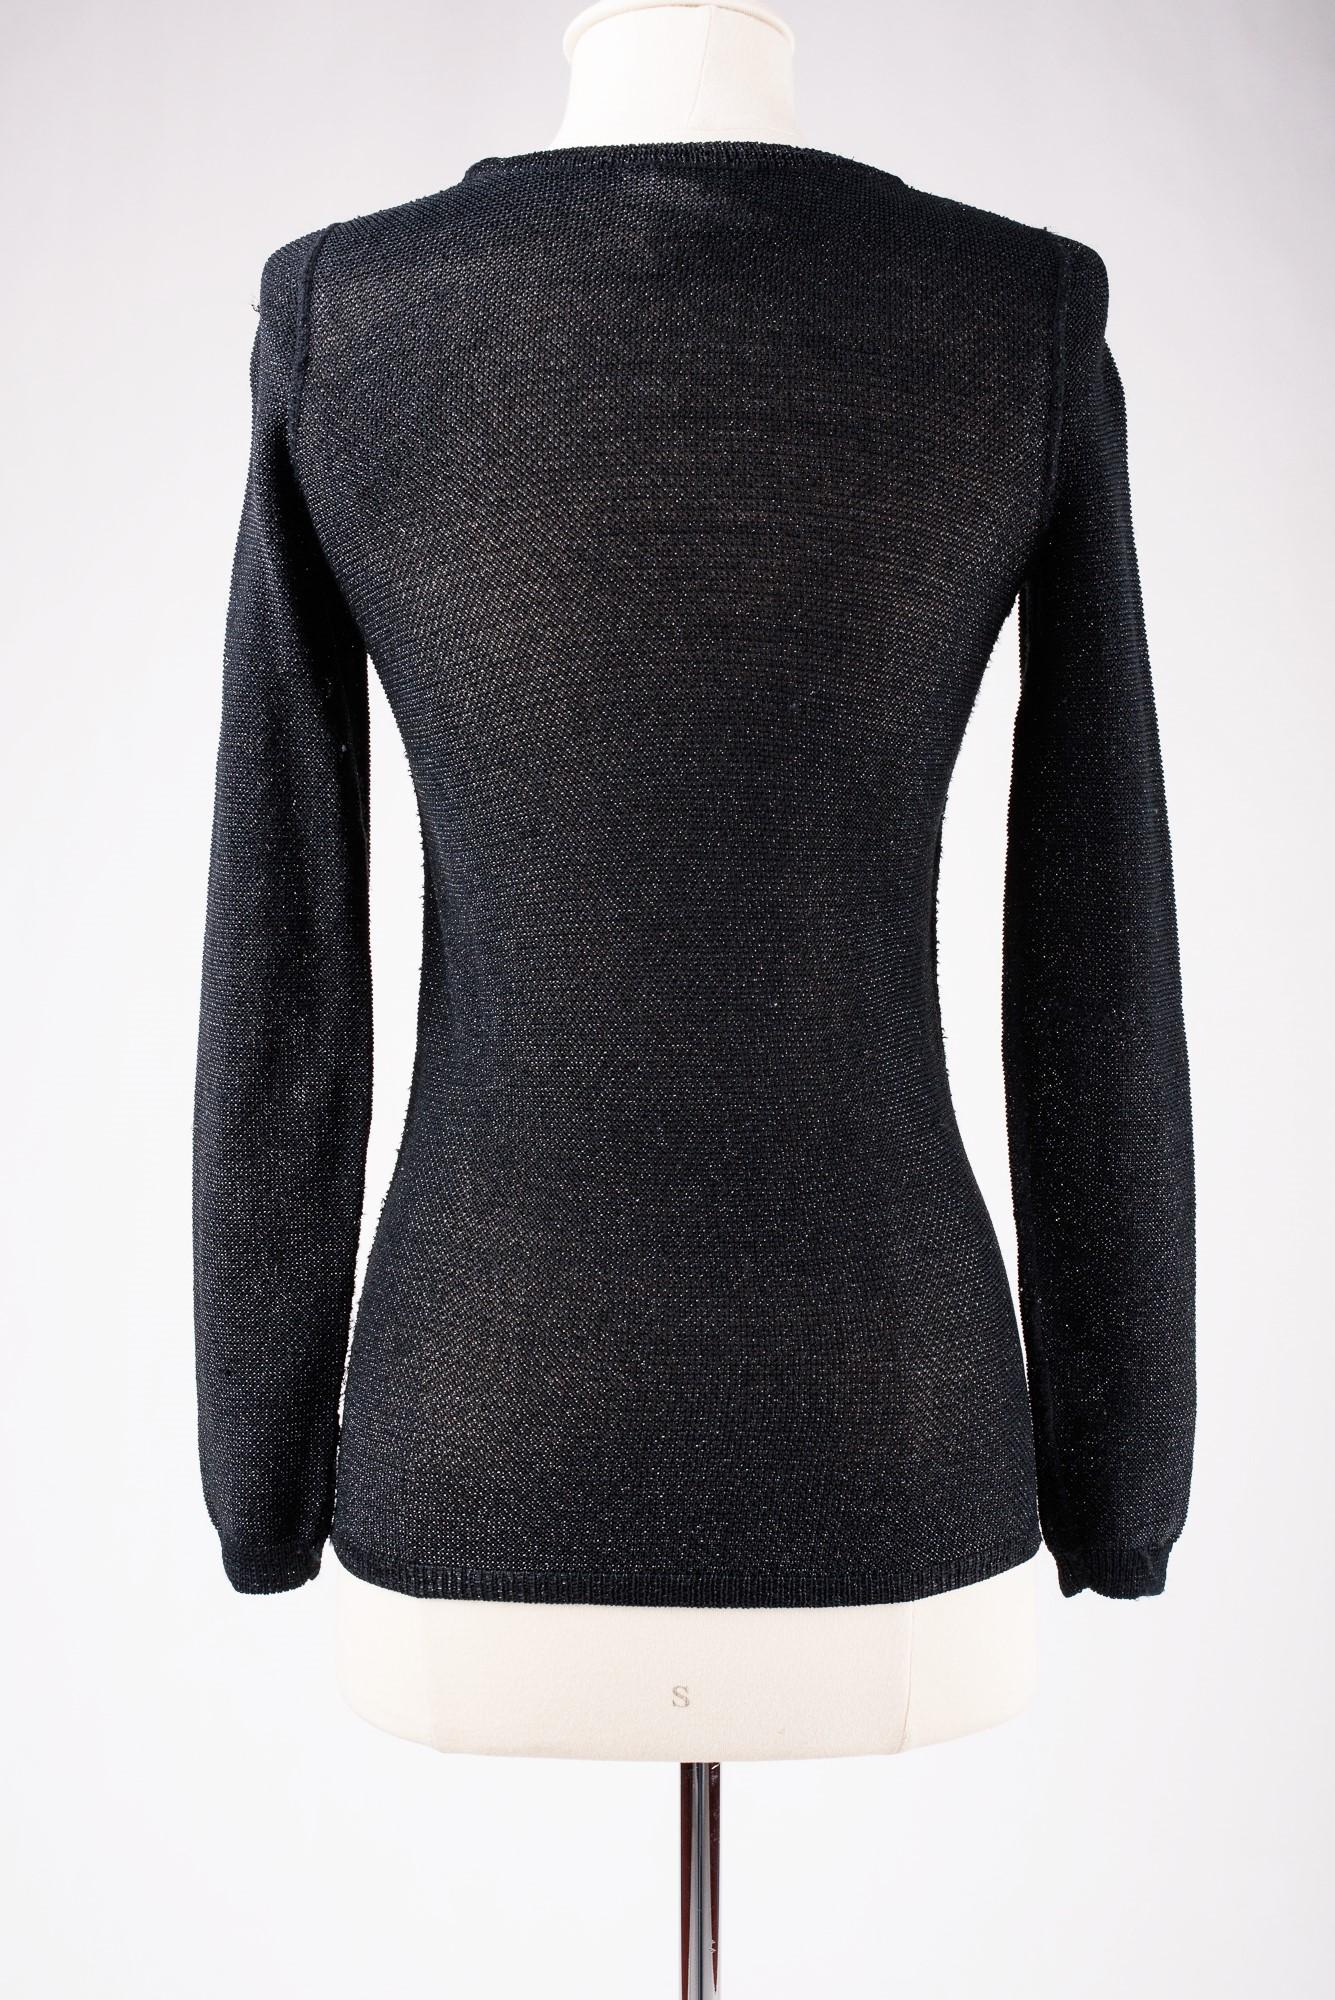 Silver lurex and knitted jumper by André Courrèges - France Circa 1970-1980 For Sale 6